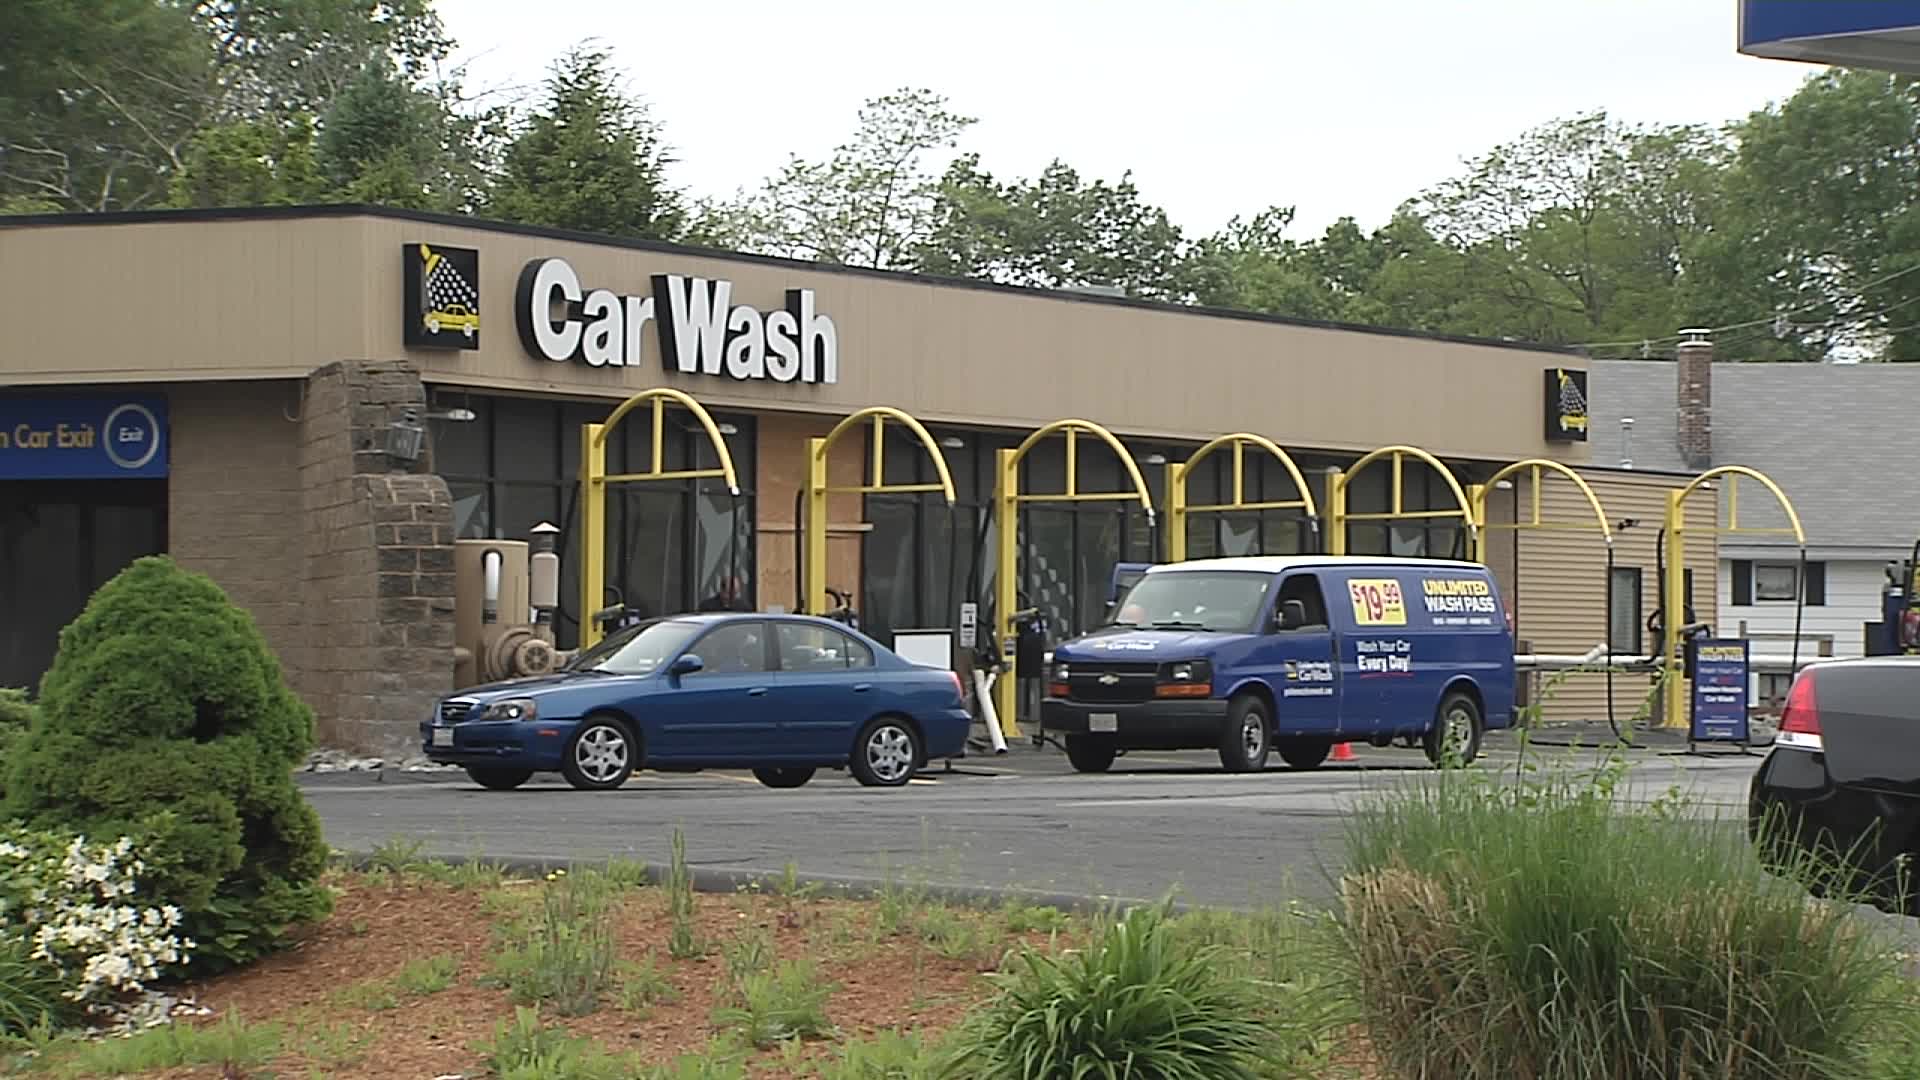 Thumbnail for the video titled "Car crashed into Golden Nozzle Car Wash in East Longmeadow"